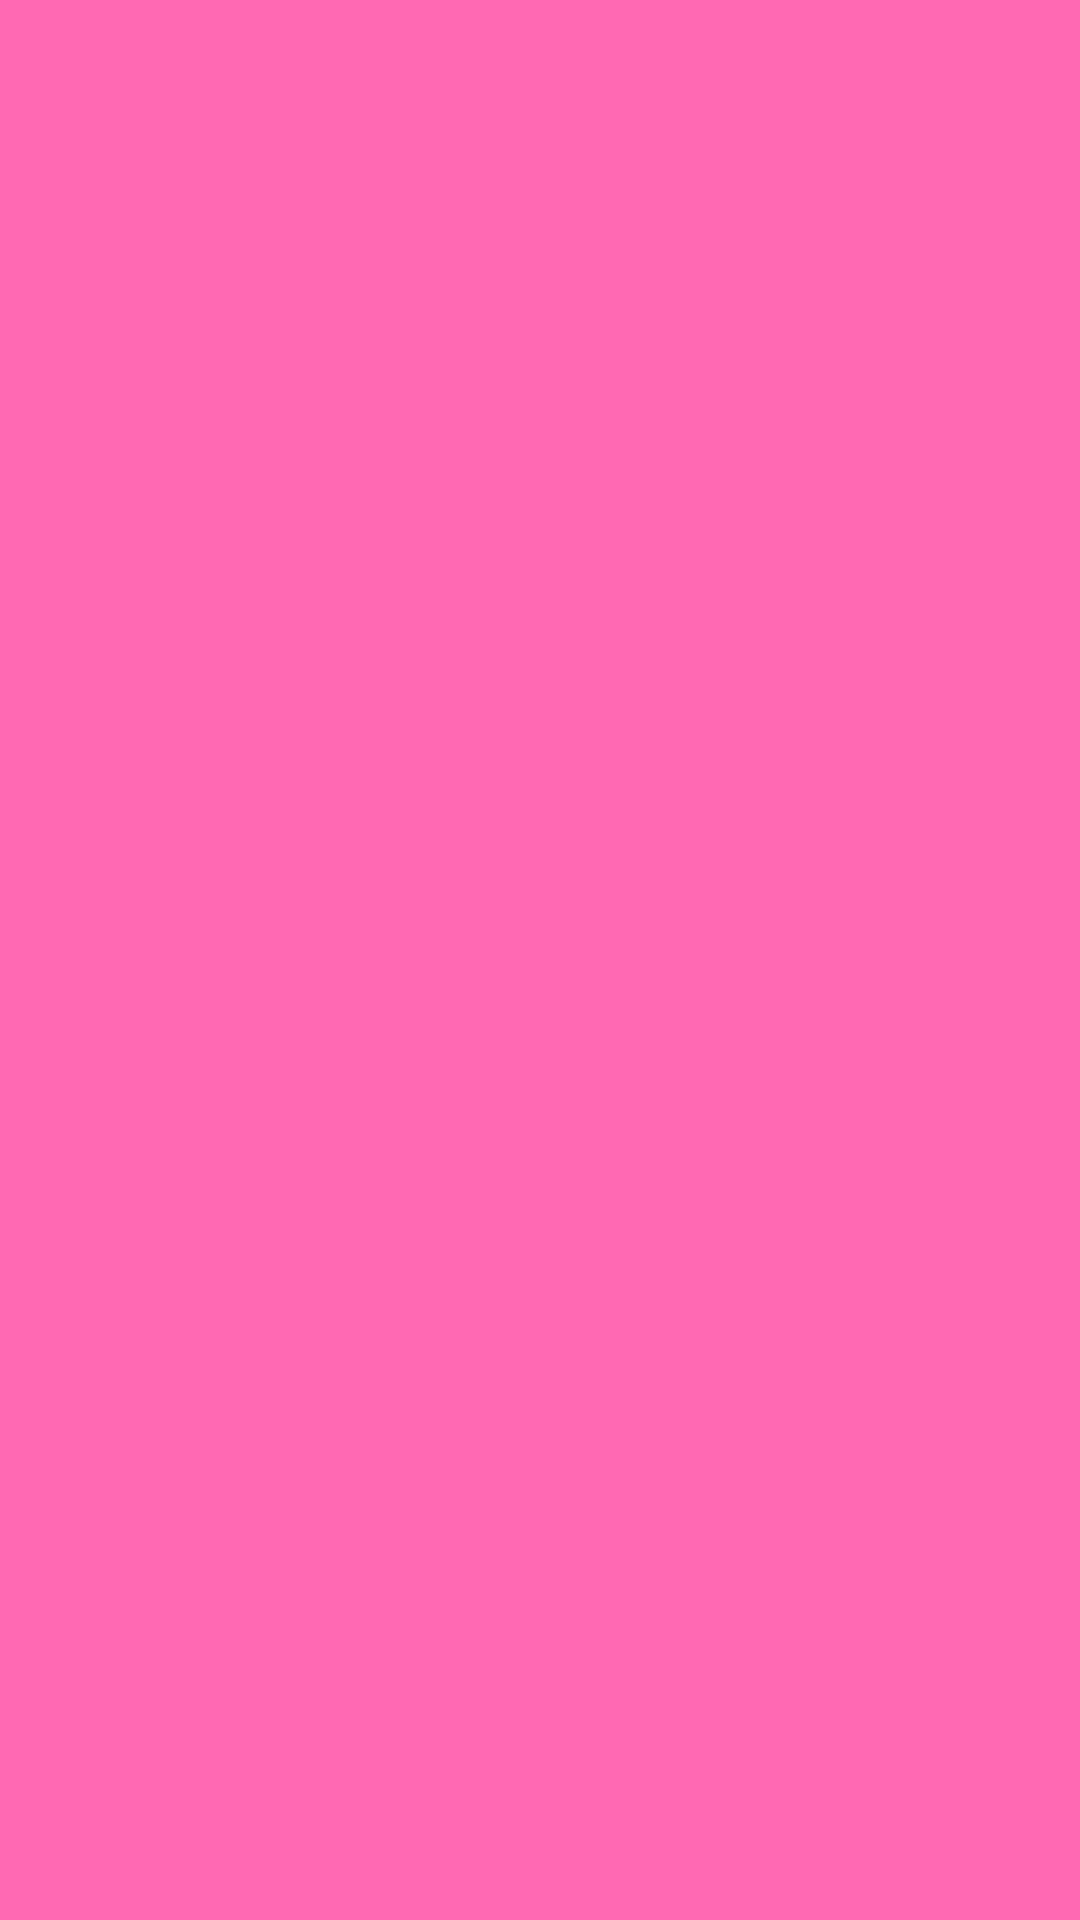 1080x1920 Solid Pink Color Wallpapers Top Free Solid Pink Color Backgrounds